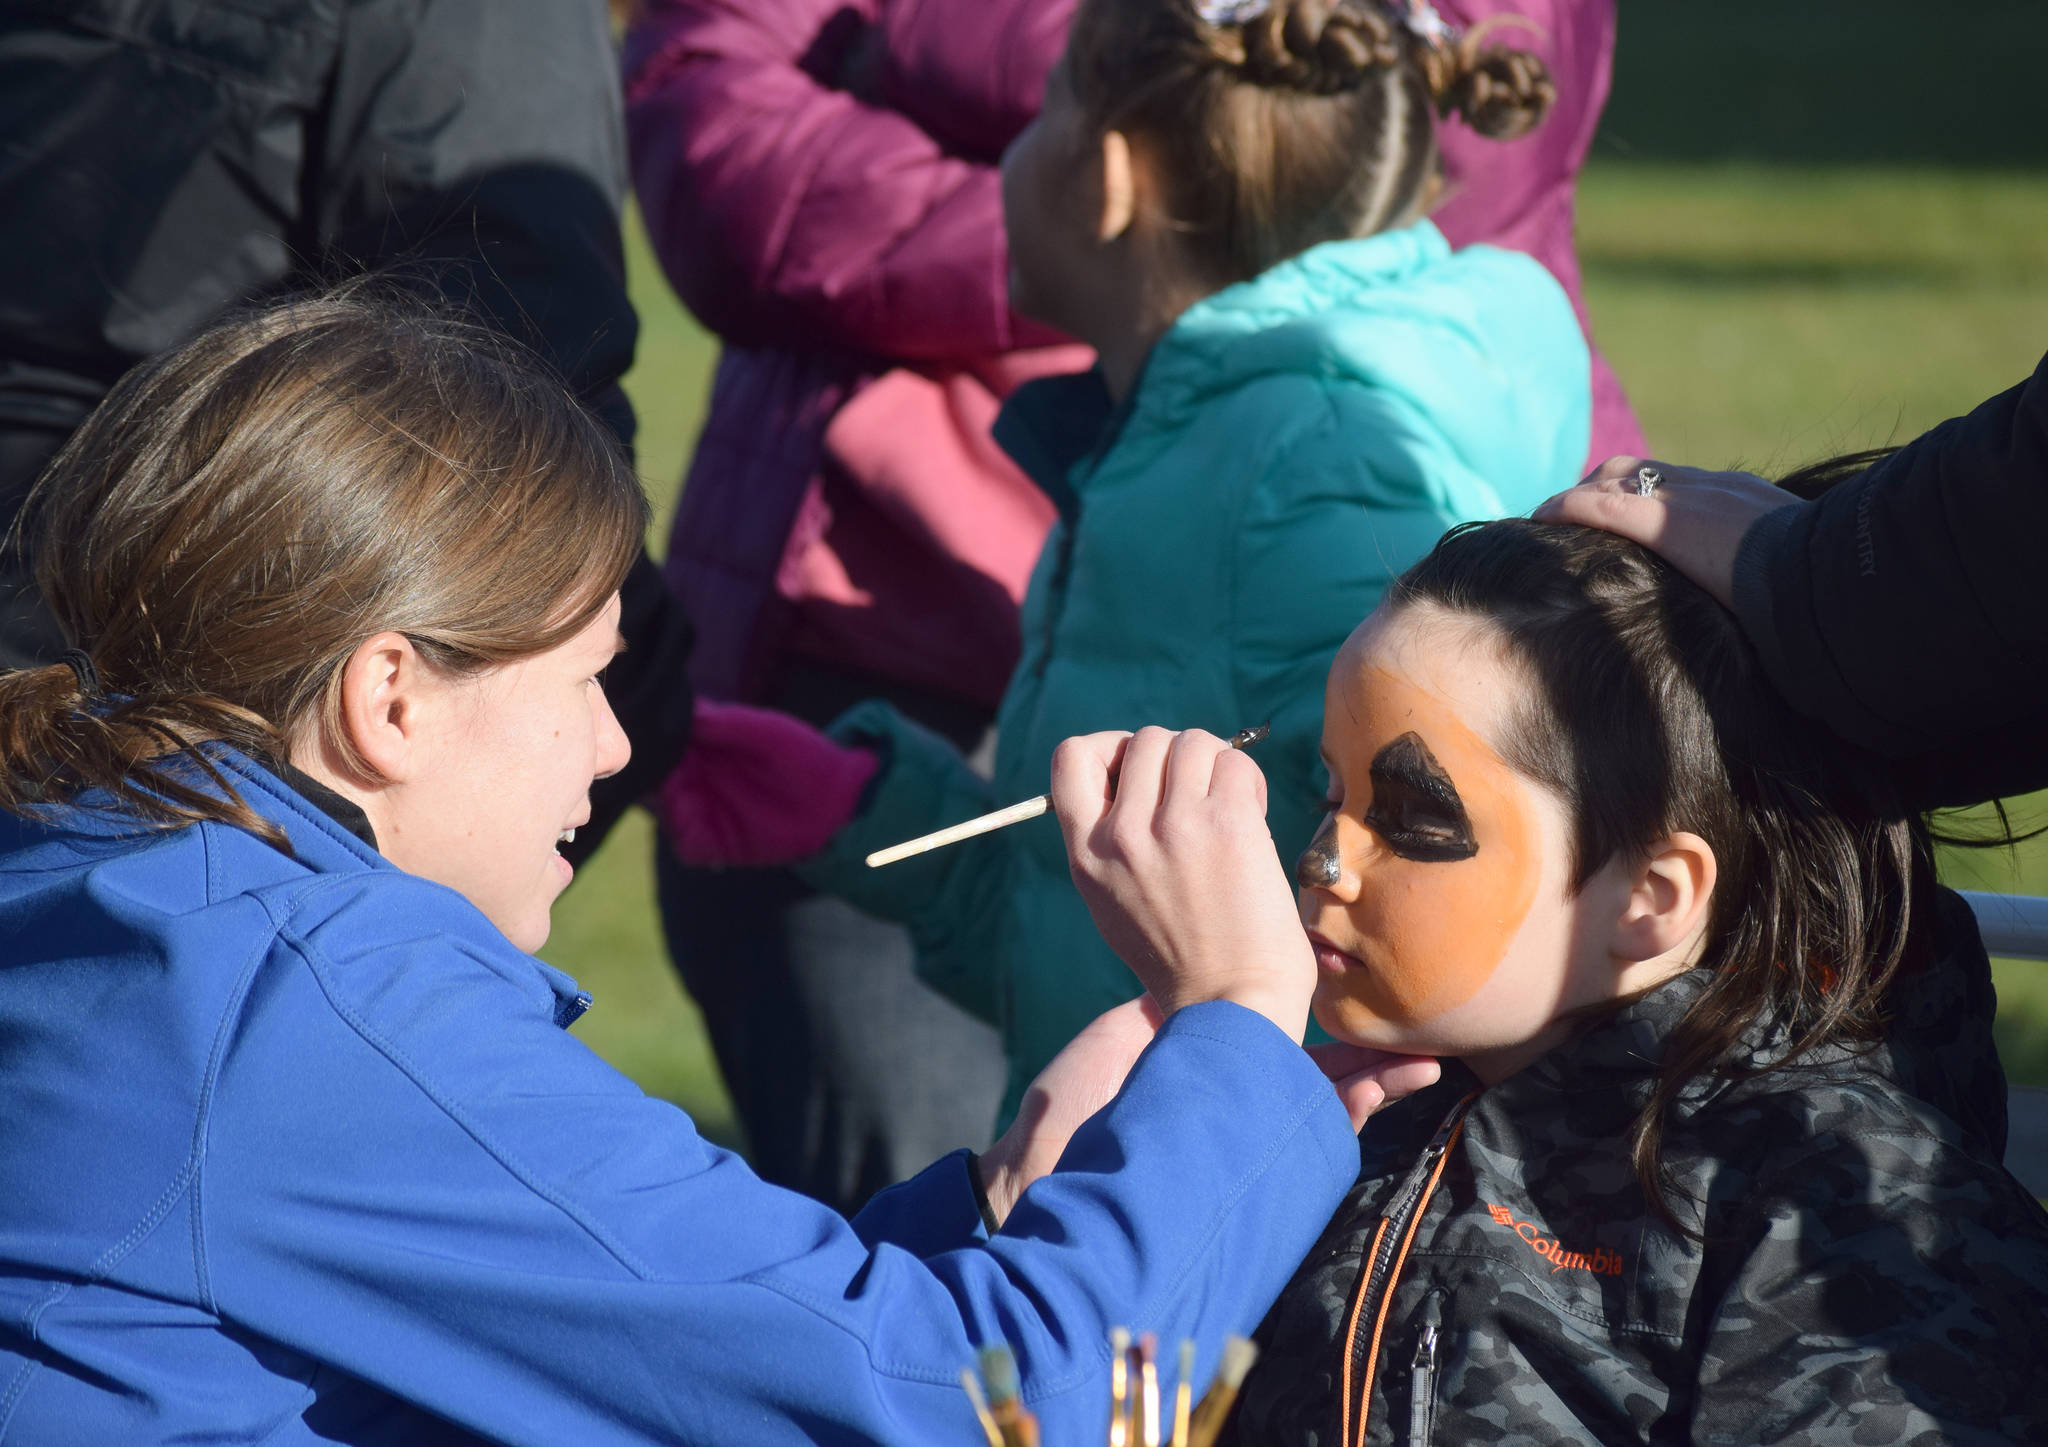 Children get their face painted Saturday, Oct. 12, 2019, at the fourth annual Fall Pumpkin Festival at Millenium Square in Kenai, Alaska. t. (Photo by Joey Klecka/Peninsula Clarion)